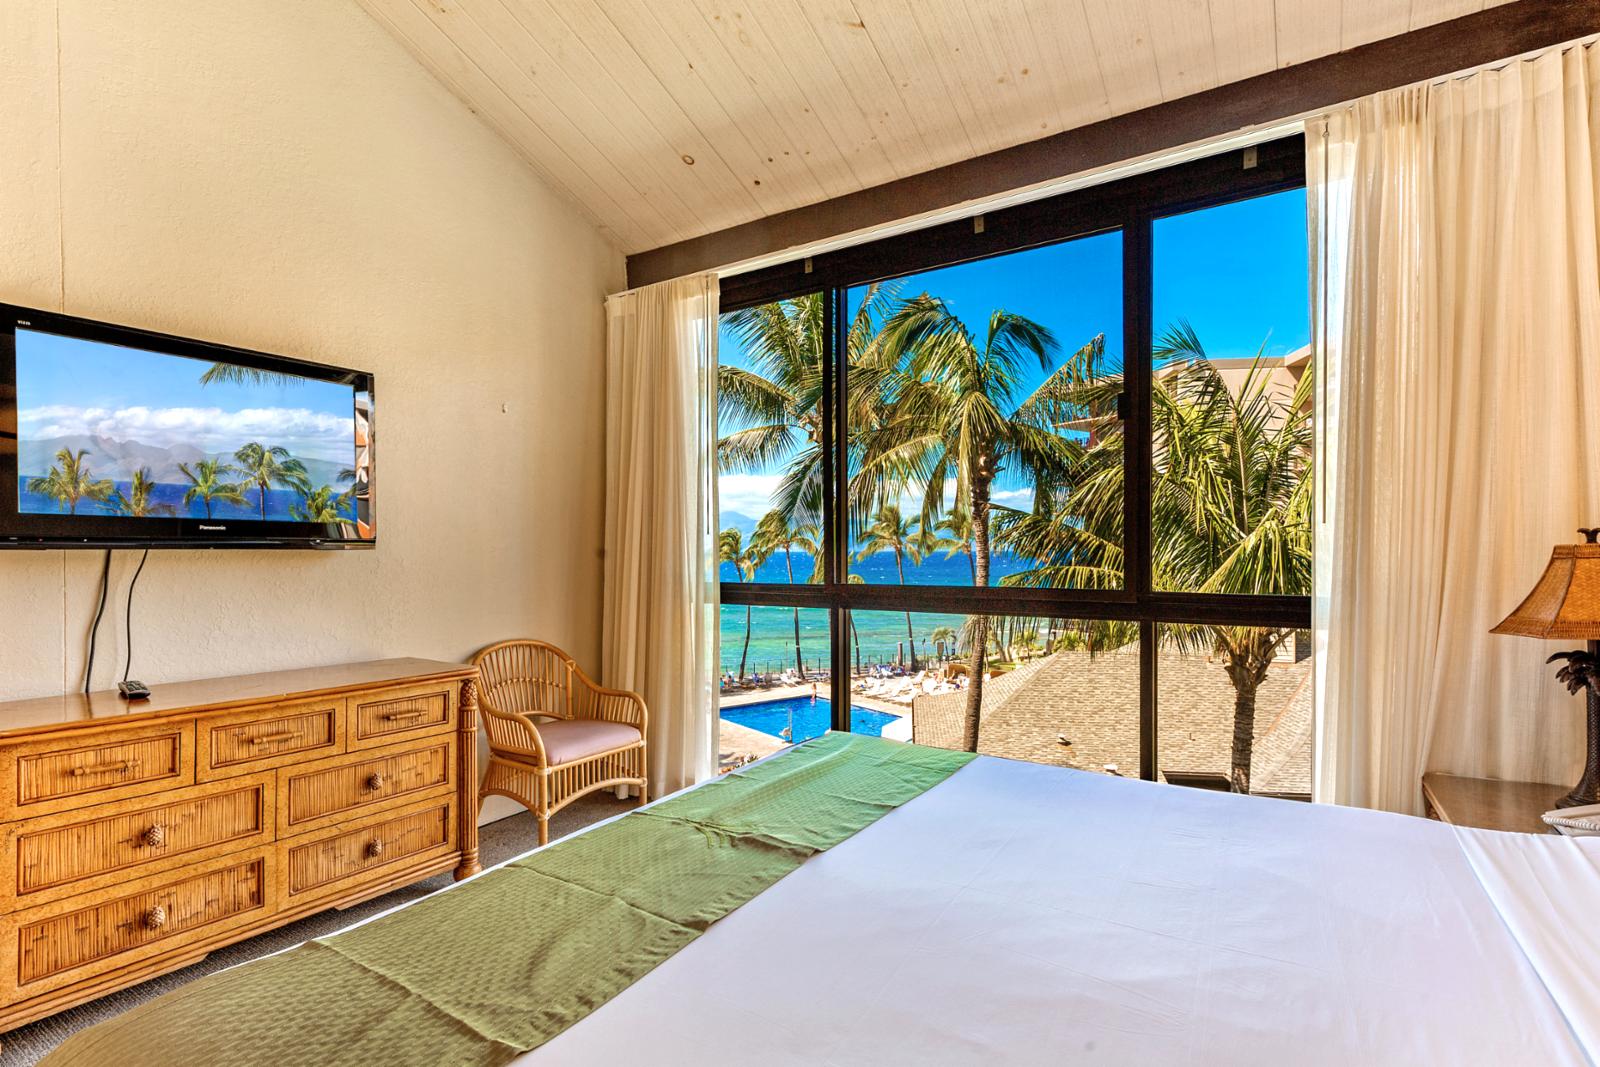 Large wall mounted flat screen television, did we mention ocean views?